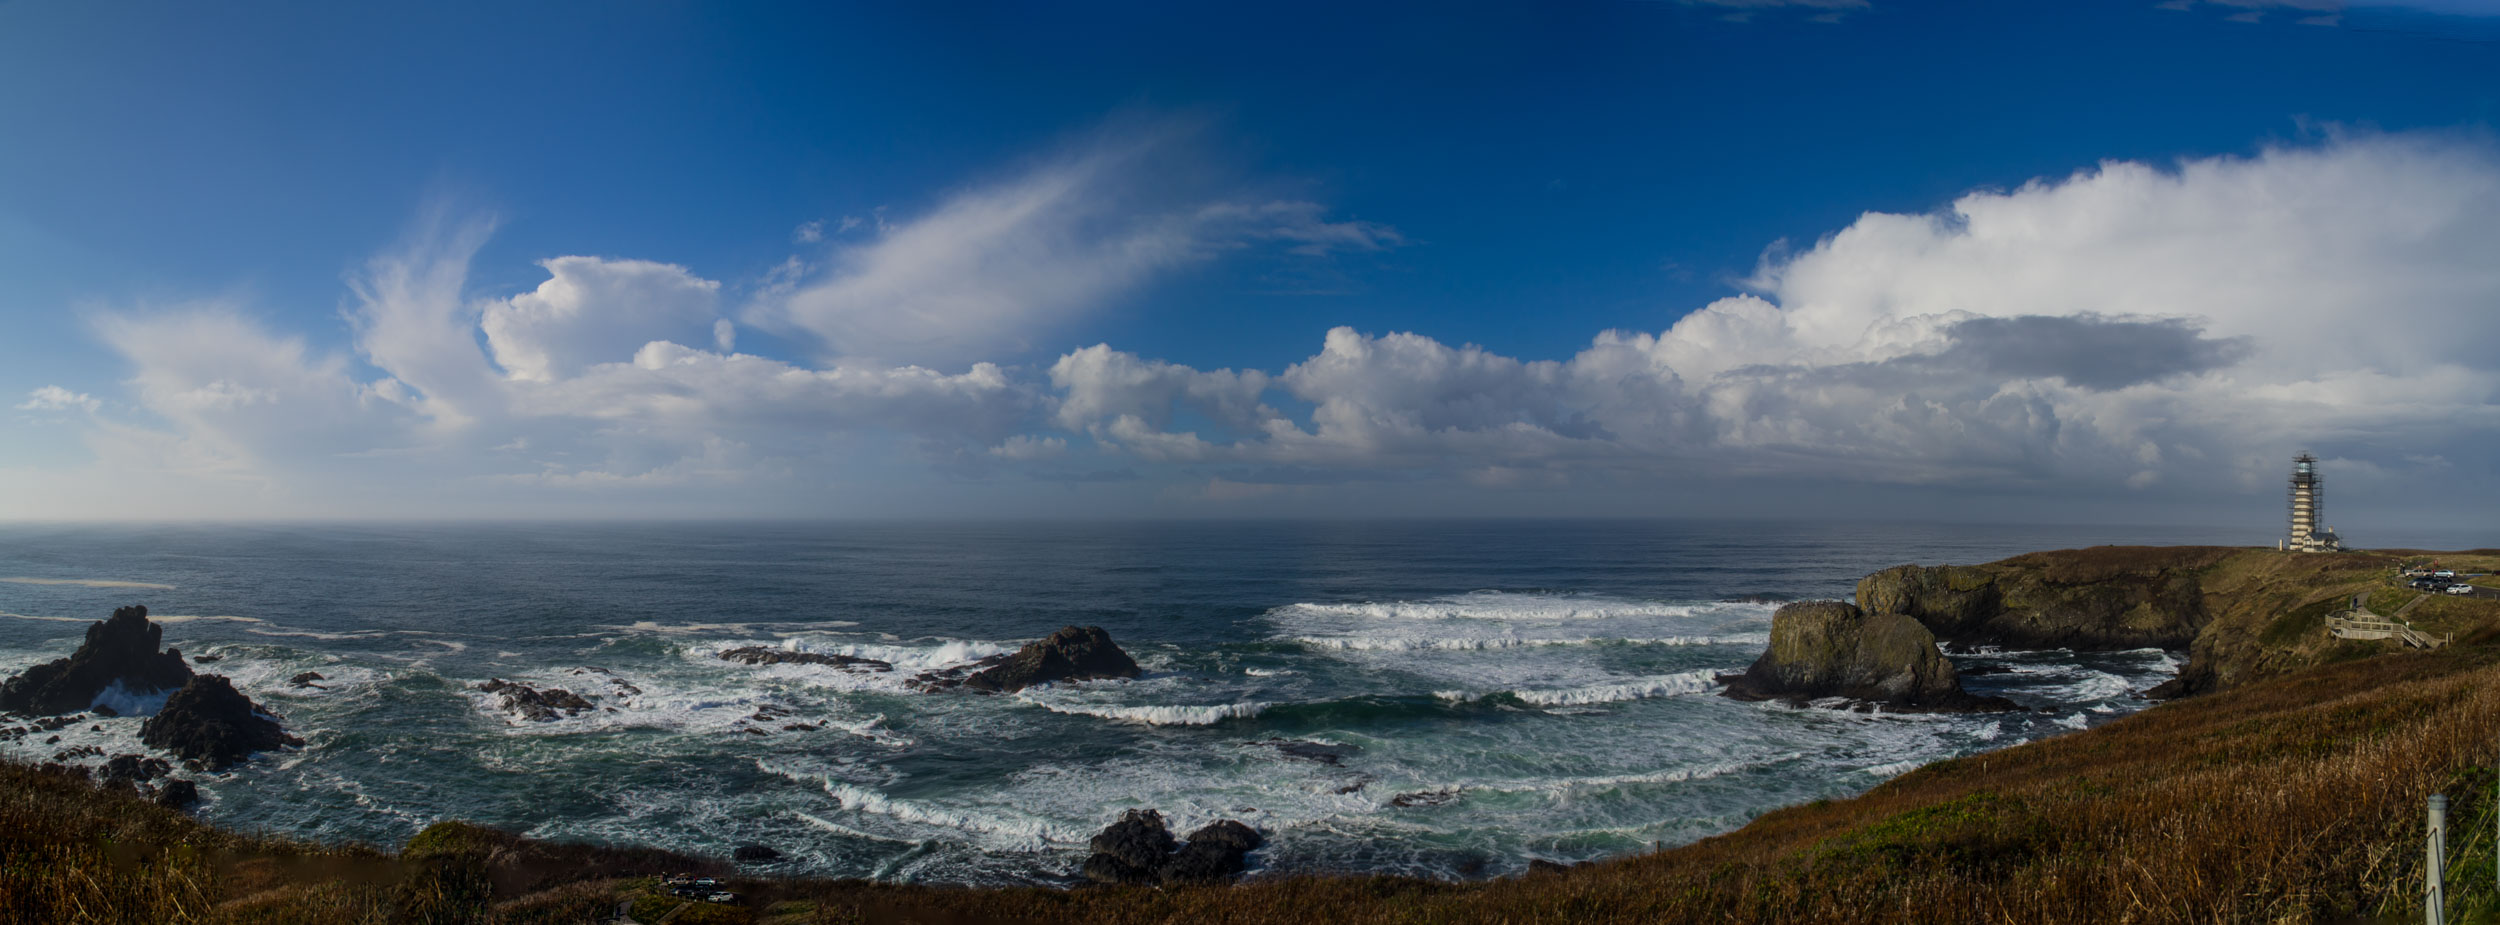 Yaquina Head Outstanding Natural Area